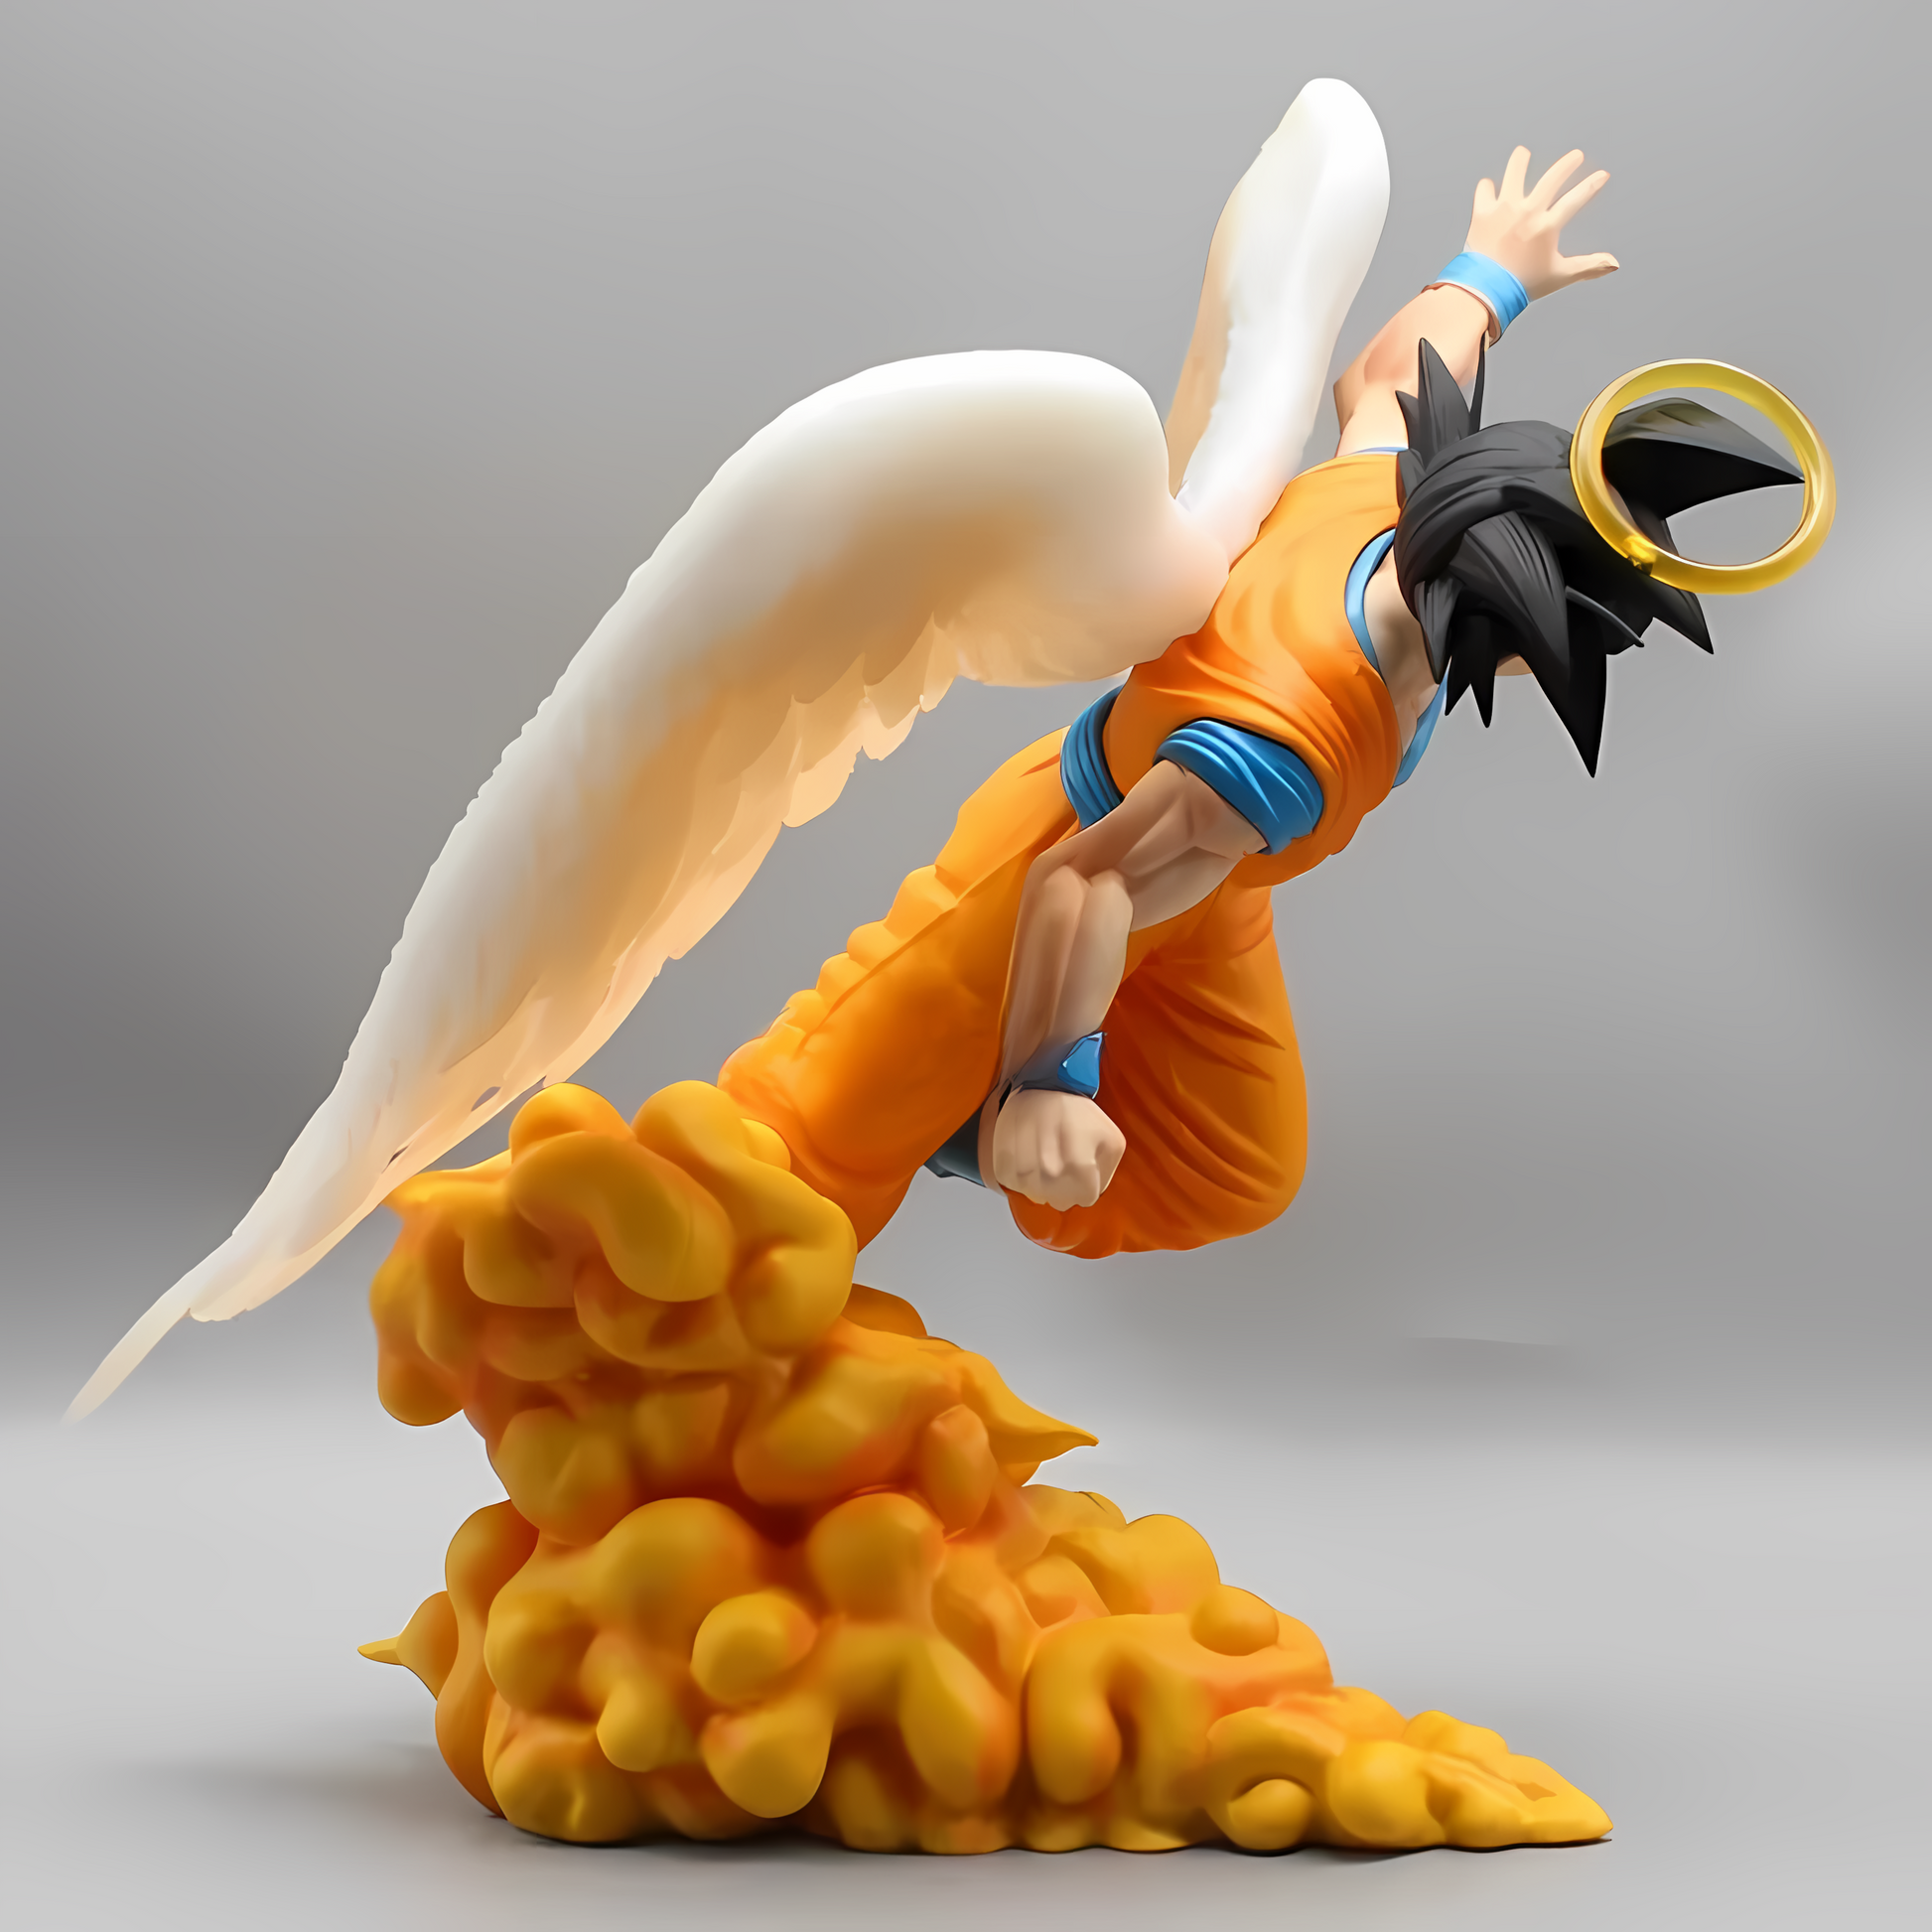 A side view of the 'Raising from Heaven Goku' figure from Dragon Ball, showing Goku with outstretched angelic wings and a halo, appearing to ascend. He's positioned in a kneeling posture on a vibrant cloud, with his traditional orange fighting gi and blue wristbands, embodying a sense of divine power and grace.